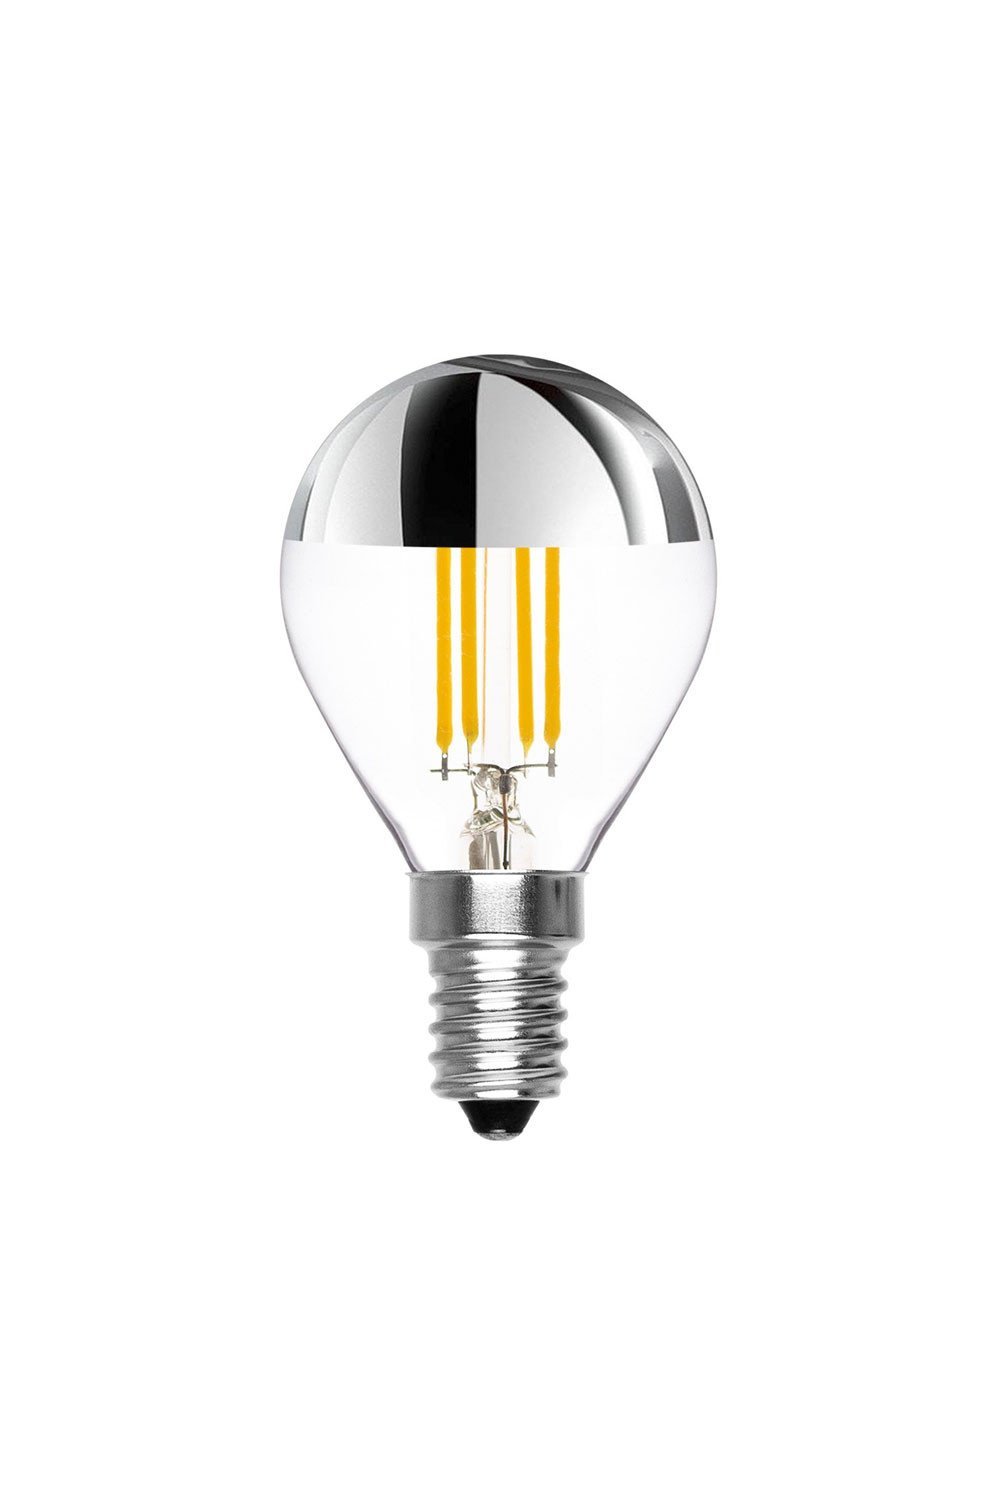 Dimmable & Reflective Vintage Led Bulb E14 Orbit, gallery image 1